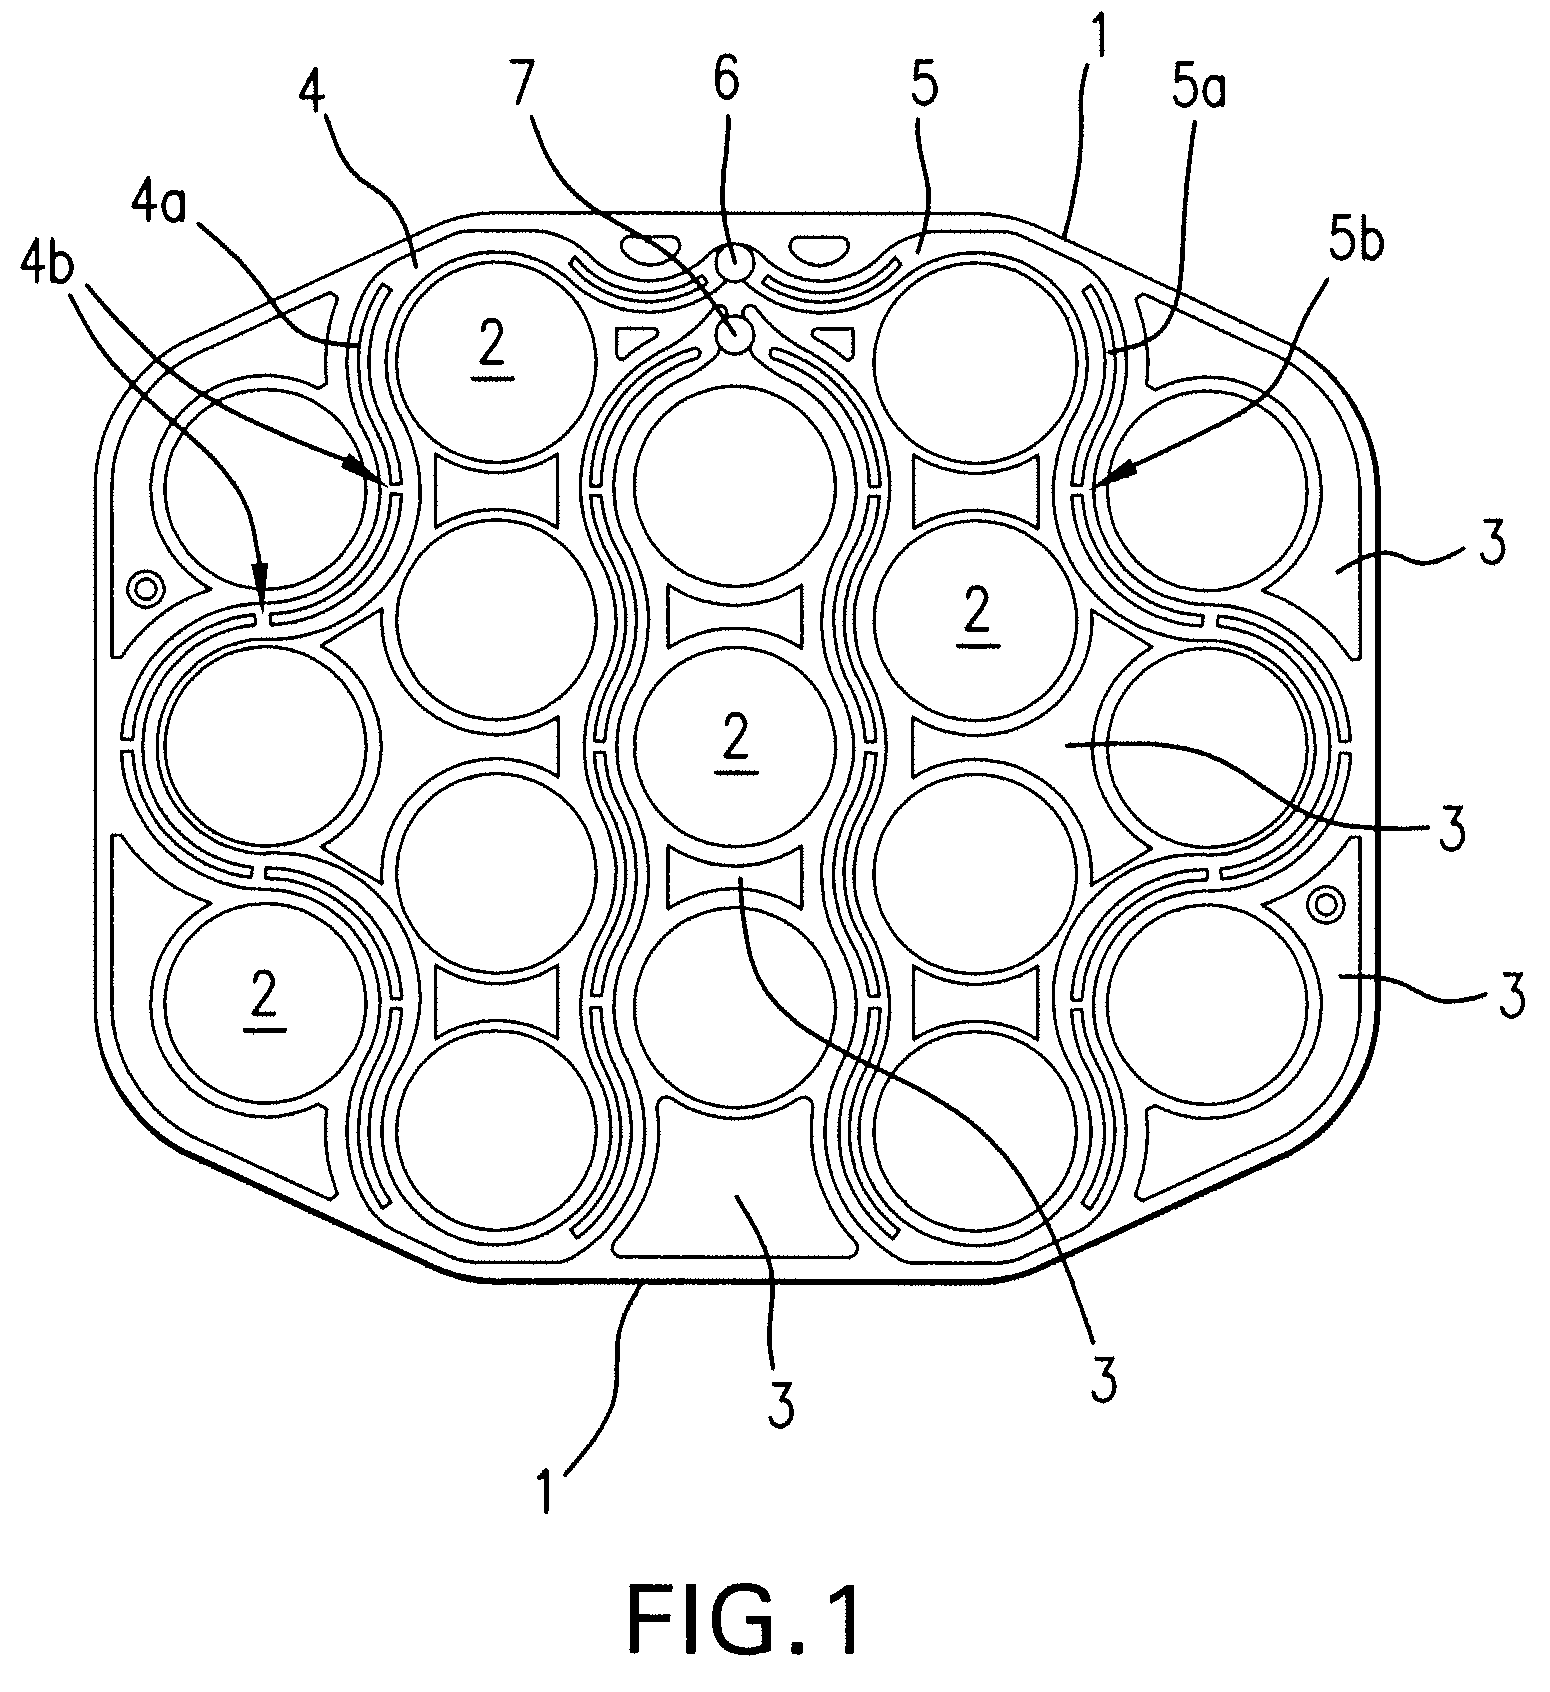 Apparatus for cooling of electrical elements